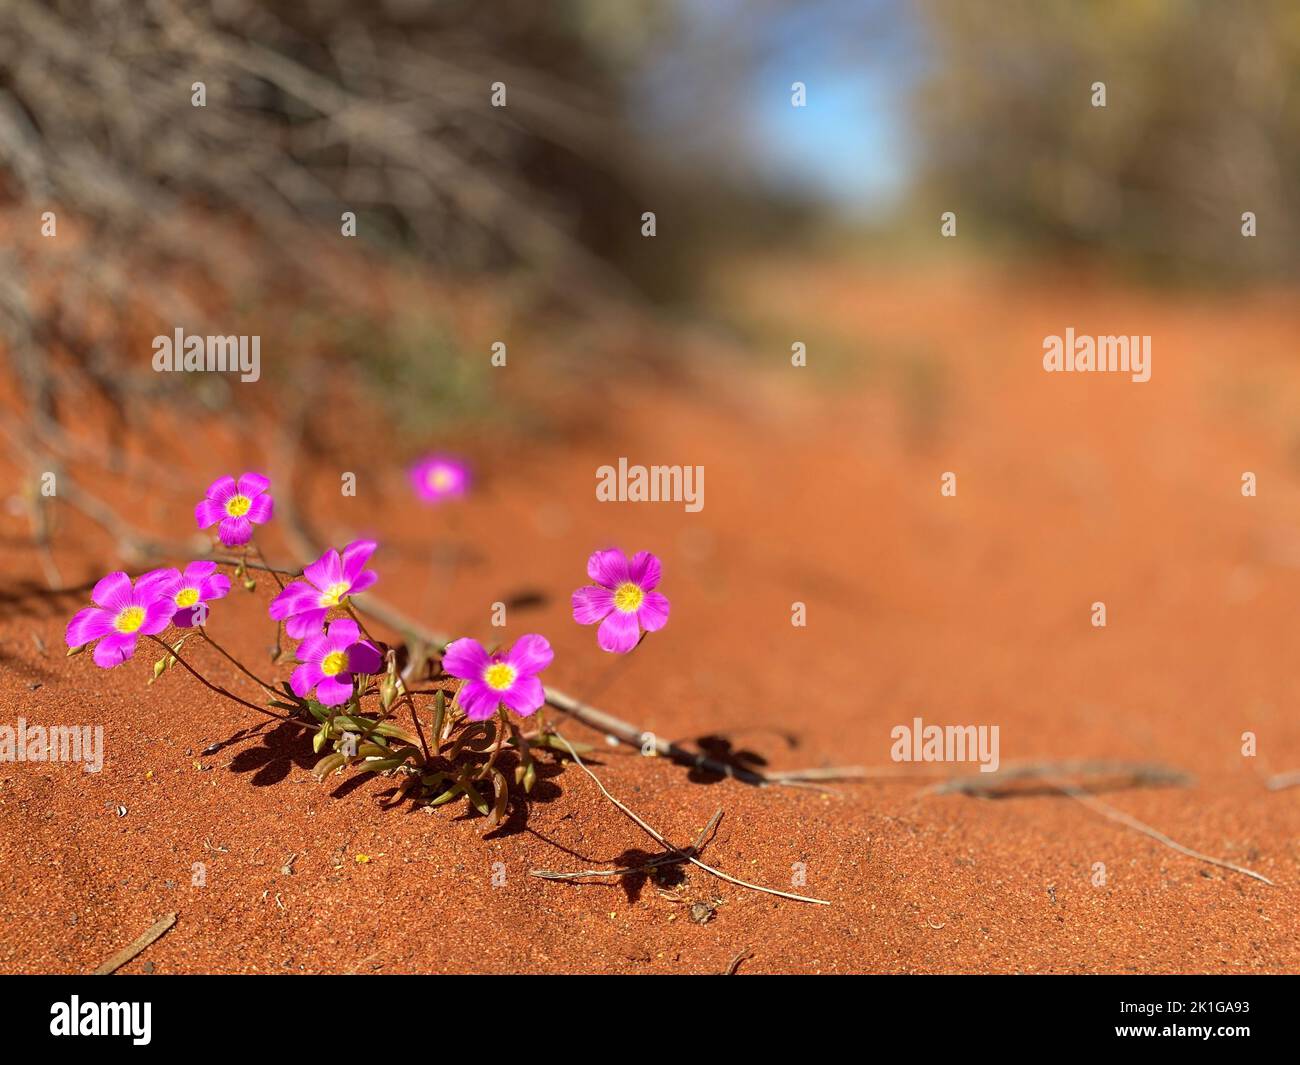 The close-up view of Malcolmia flowers growing on the orange sand Stock Photo